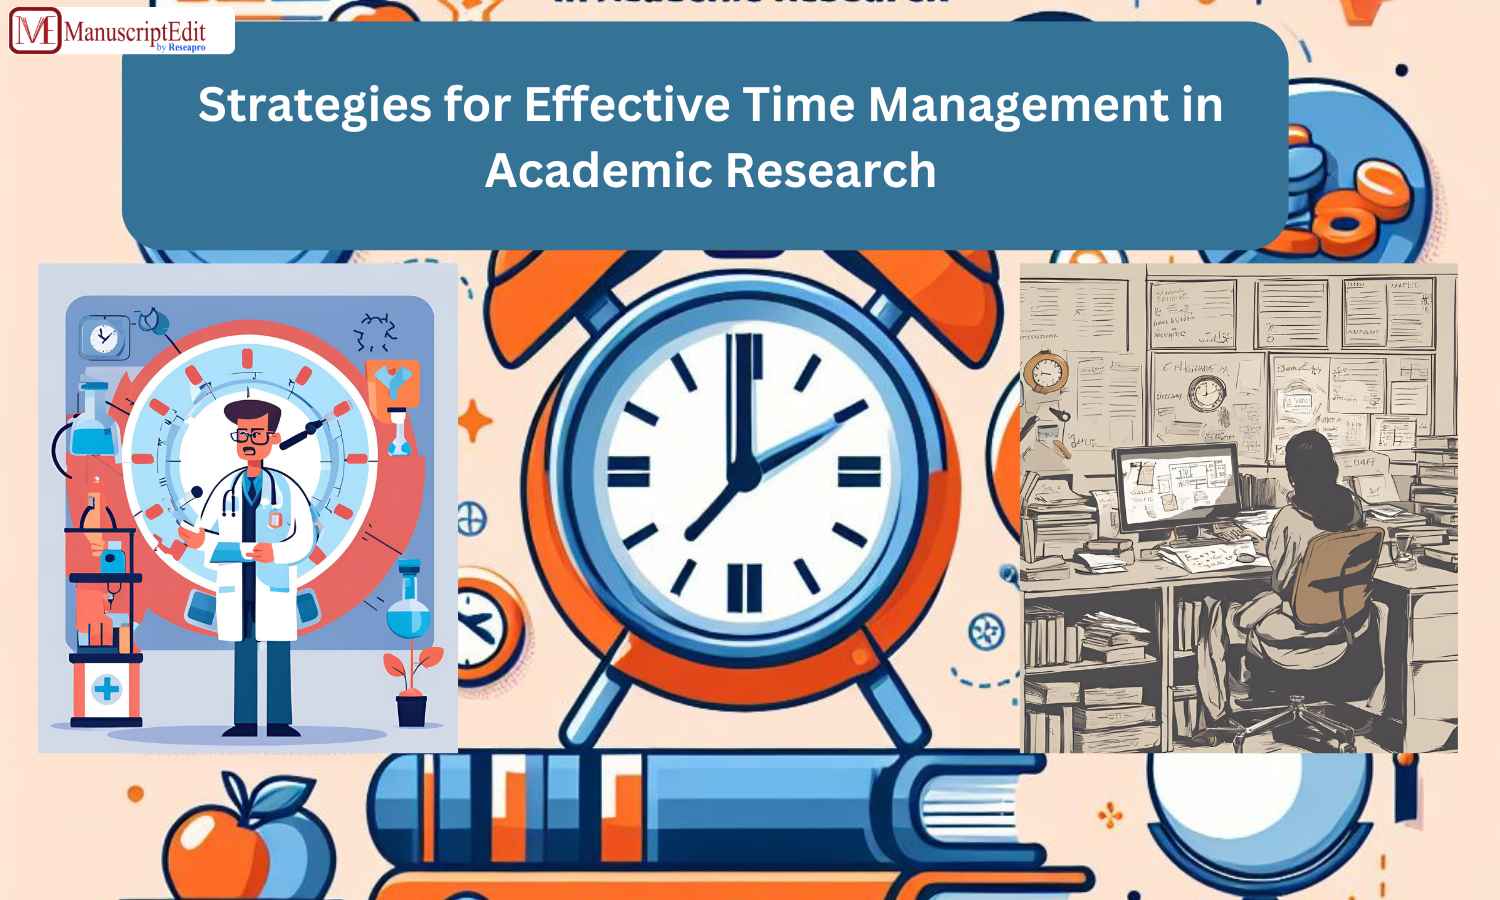 Strategies for Effective Time Management in Academic Research